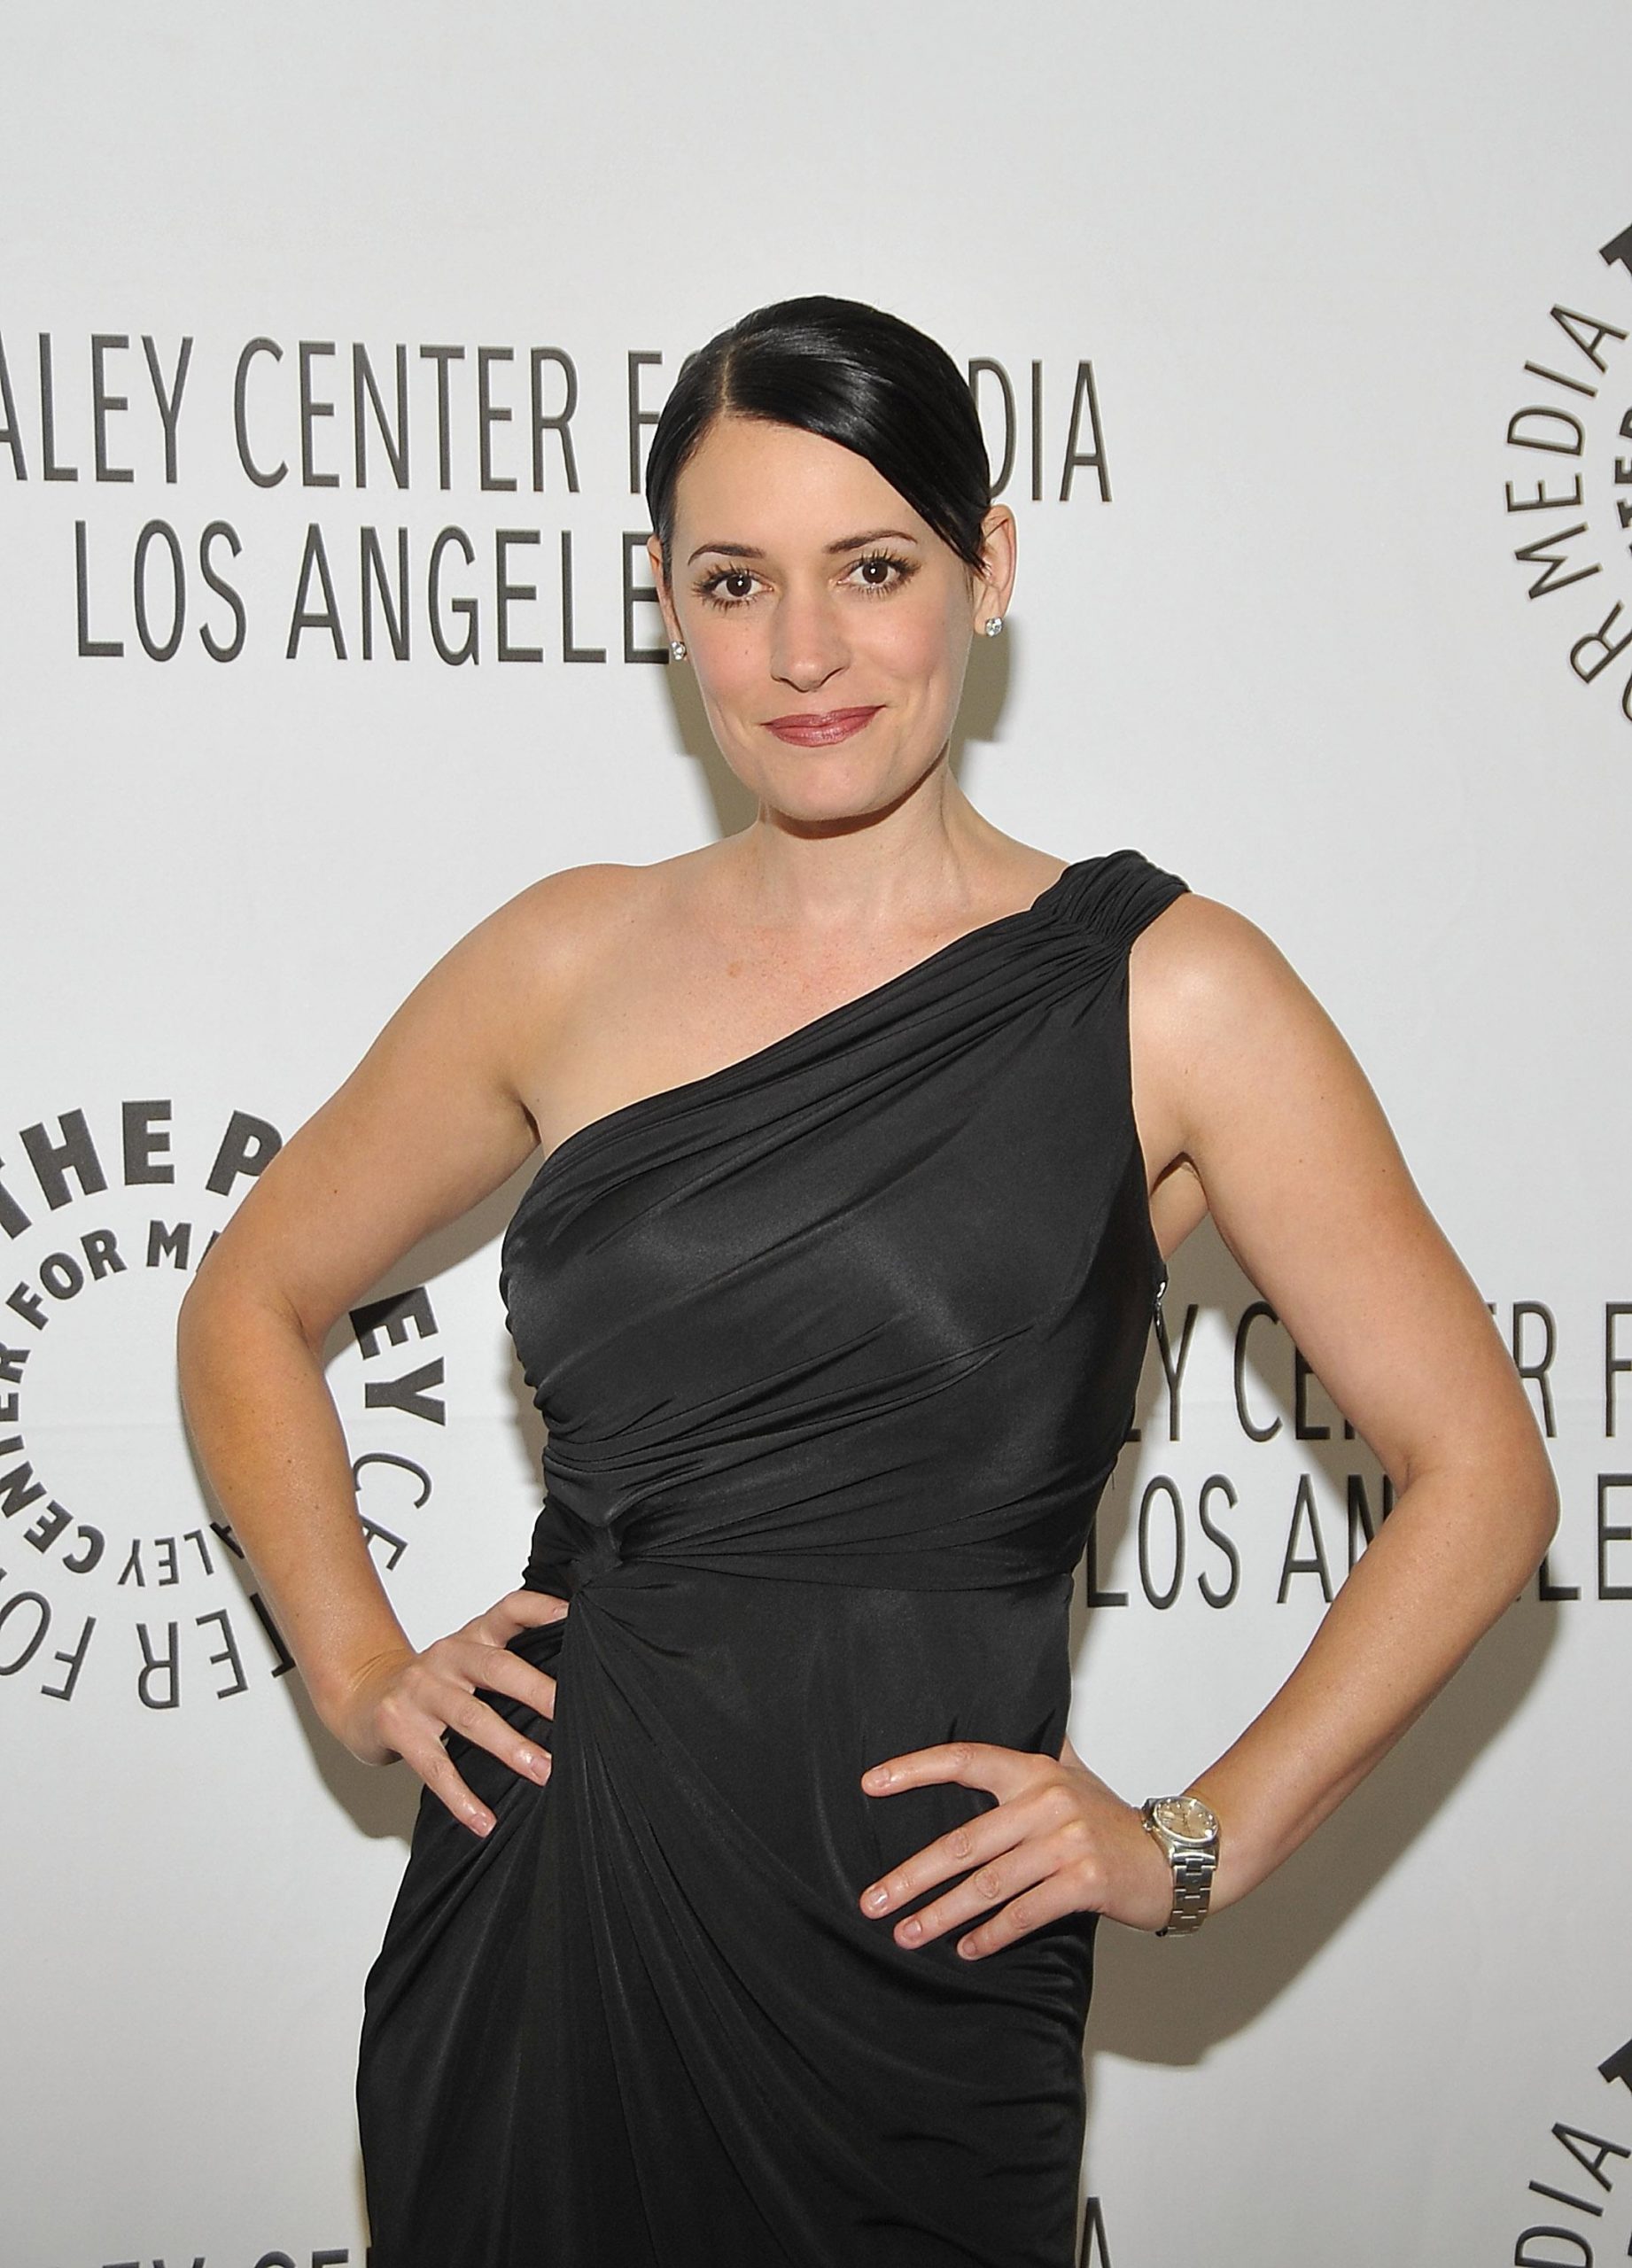 70+ Hot Pictures Of Paget Brewster From Criminal Minds Will Brighten Up Your Day 31